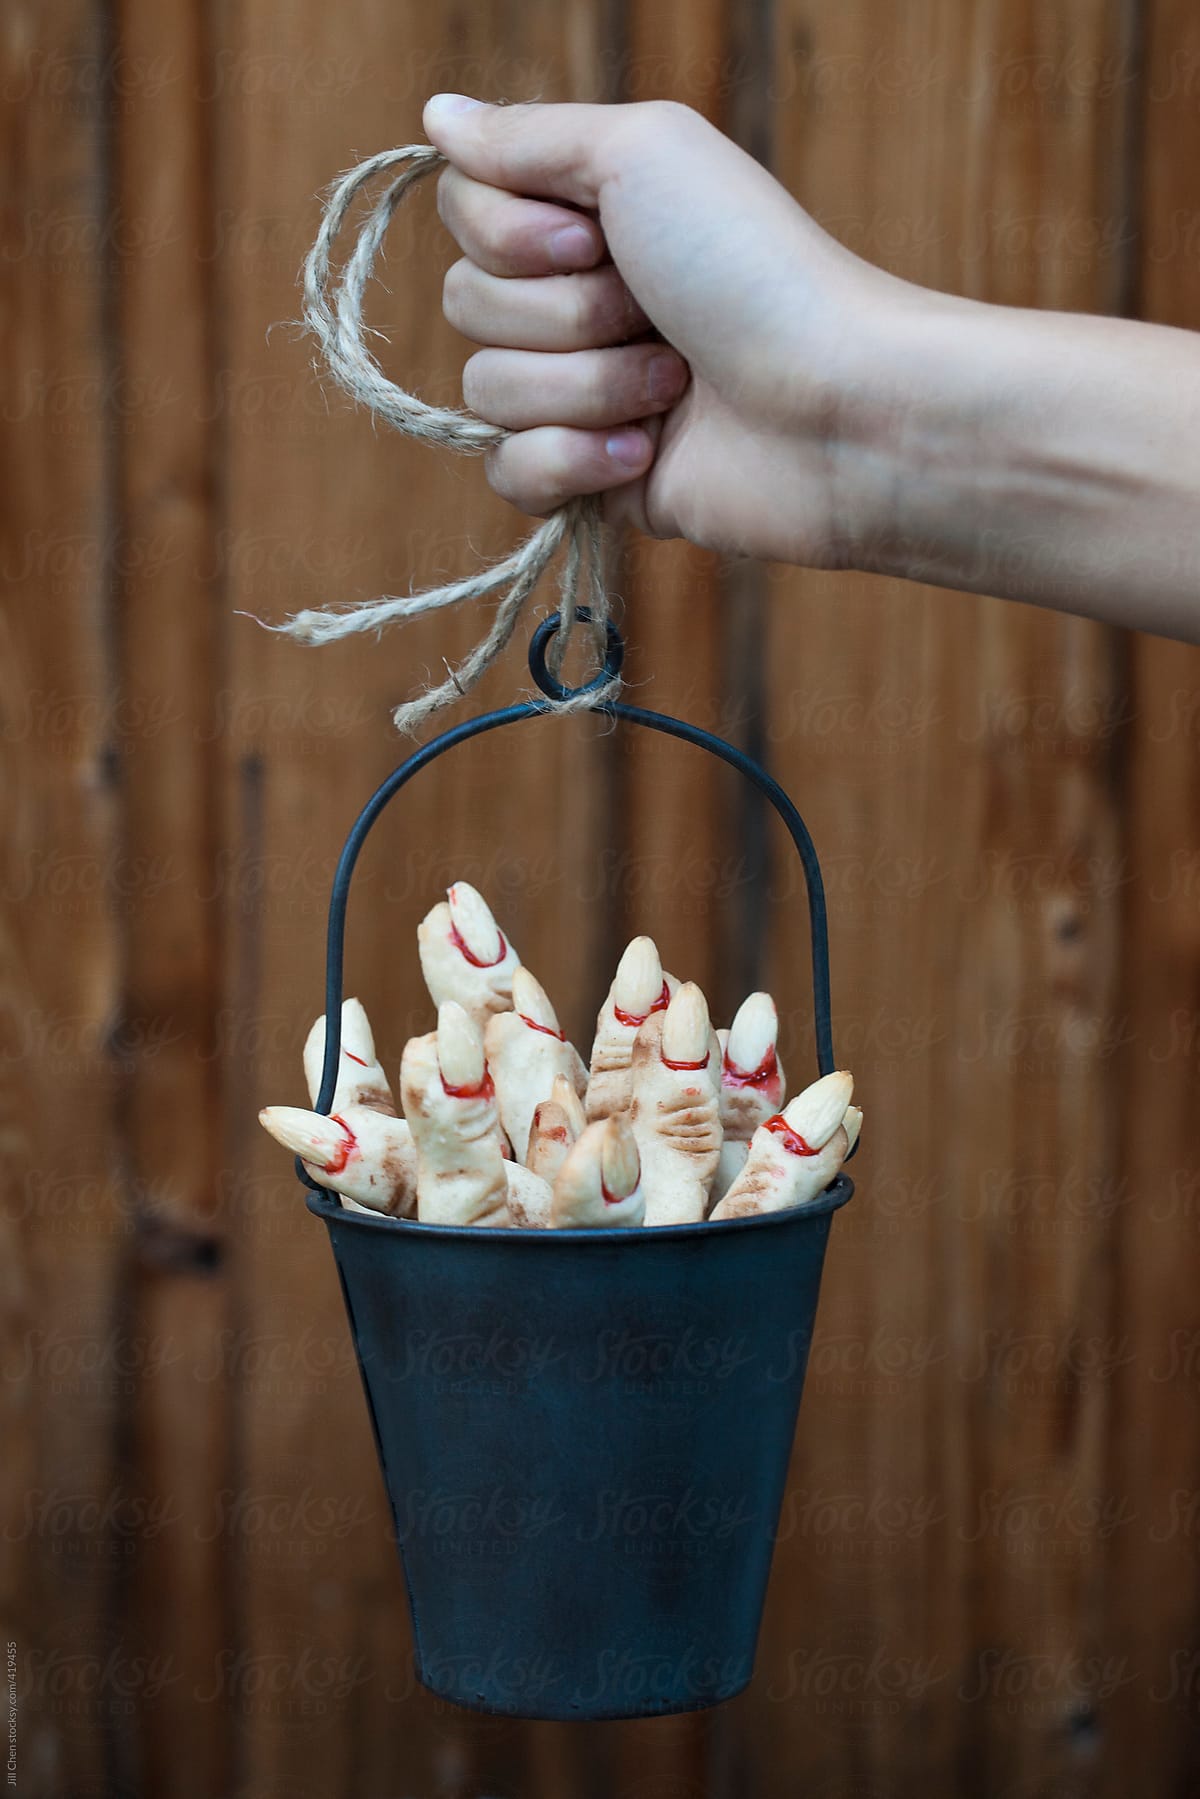 Halloween Witches' Finger Cookies